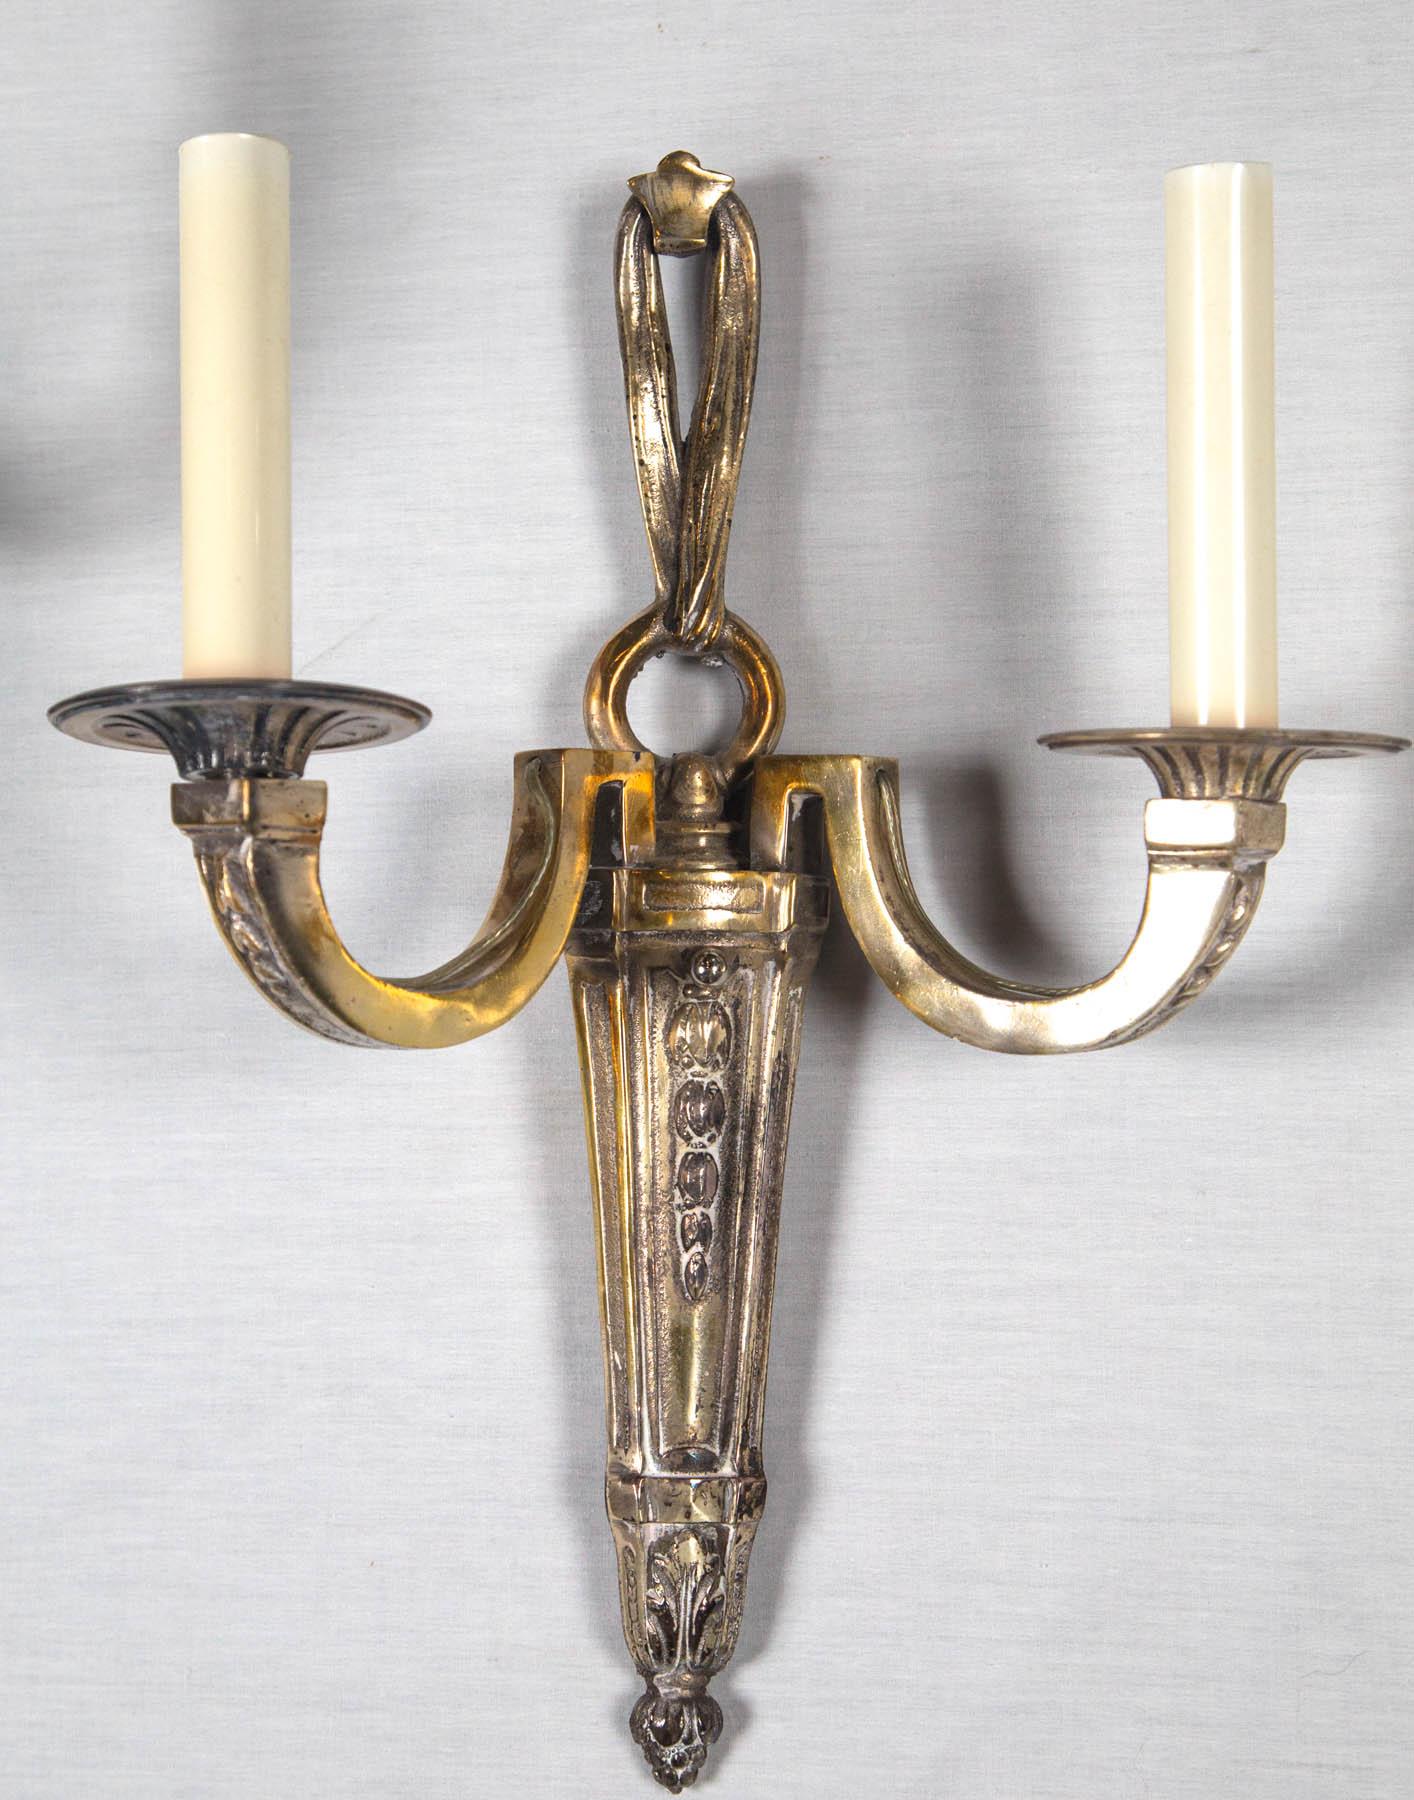 Antique Caldwell Silvered Bronze Sconces In Excellent Condition For Sale In Stamford, CT